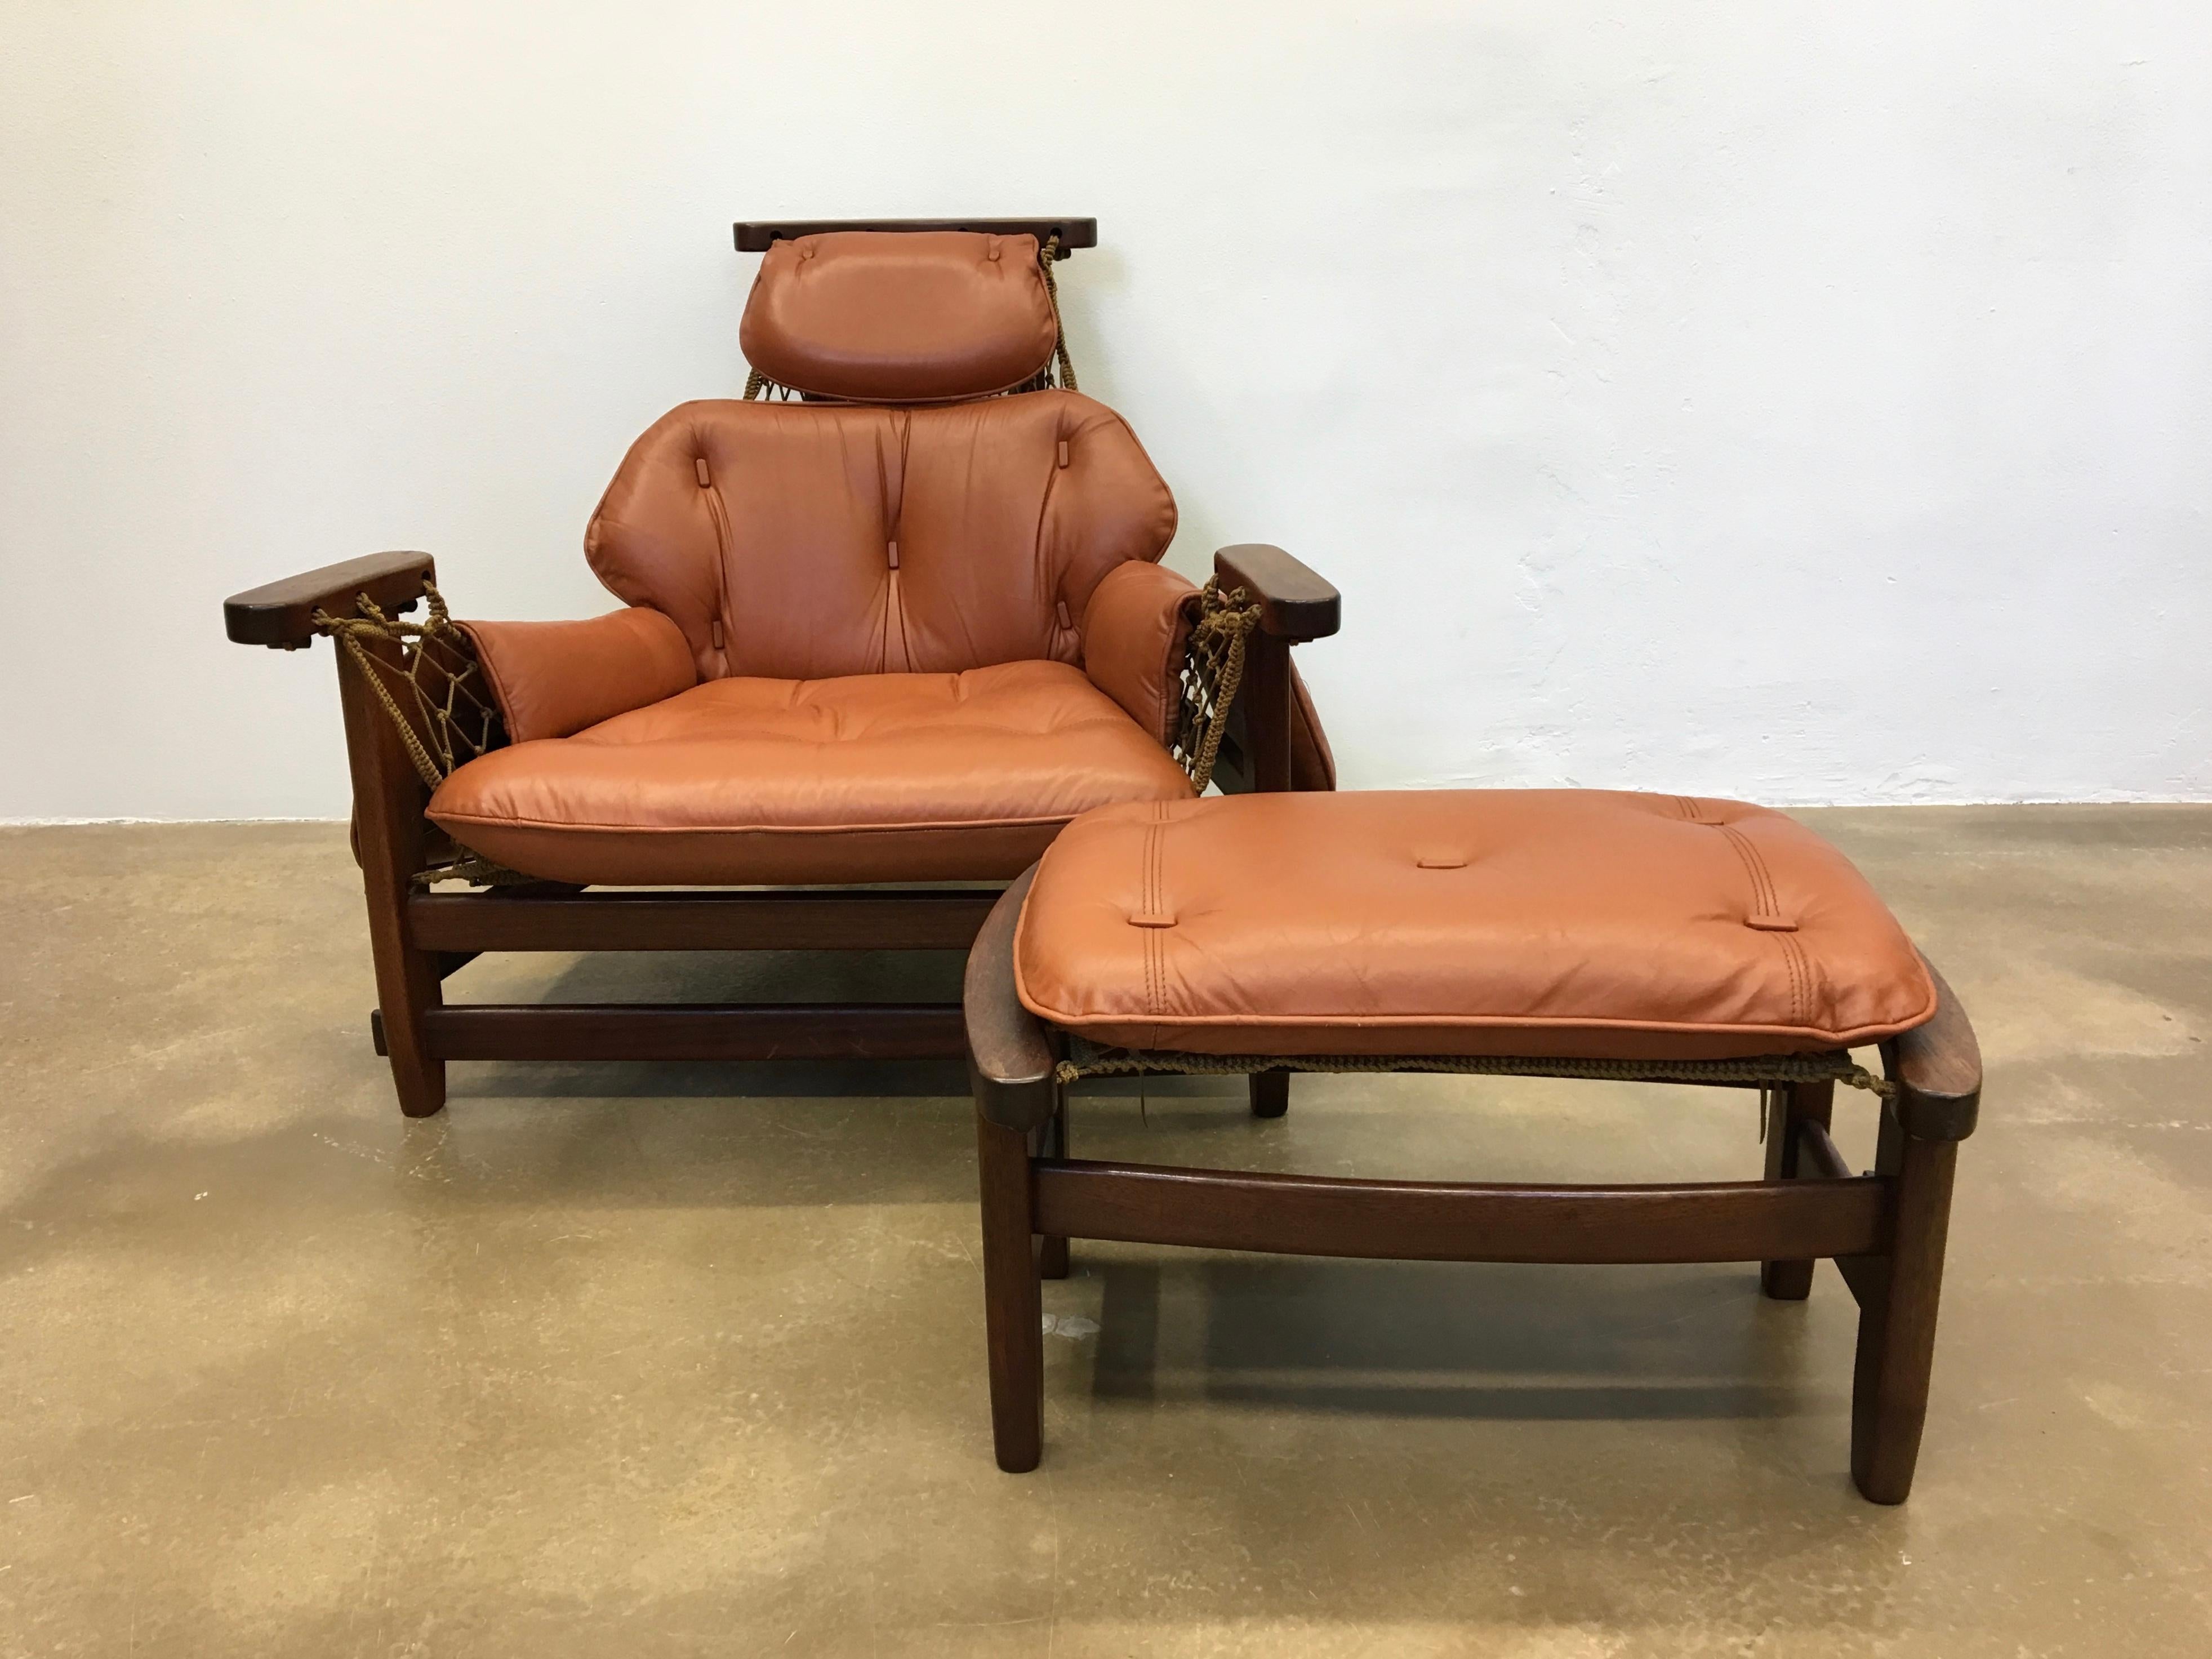 Gran Captain armchair and ottoman designed by Jean Gillon in 1960s, and produced by Wood Art. The armchair is made of mahogany wood and leather. It consists of two pieces, the armchair and the ottoman.